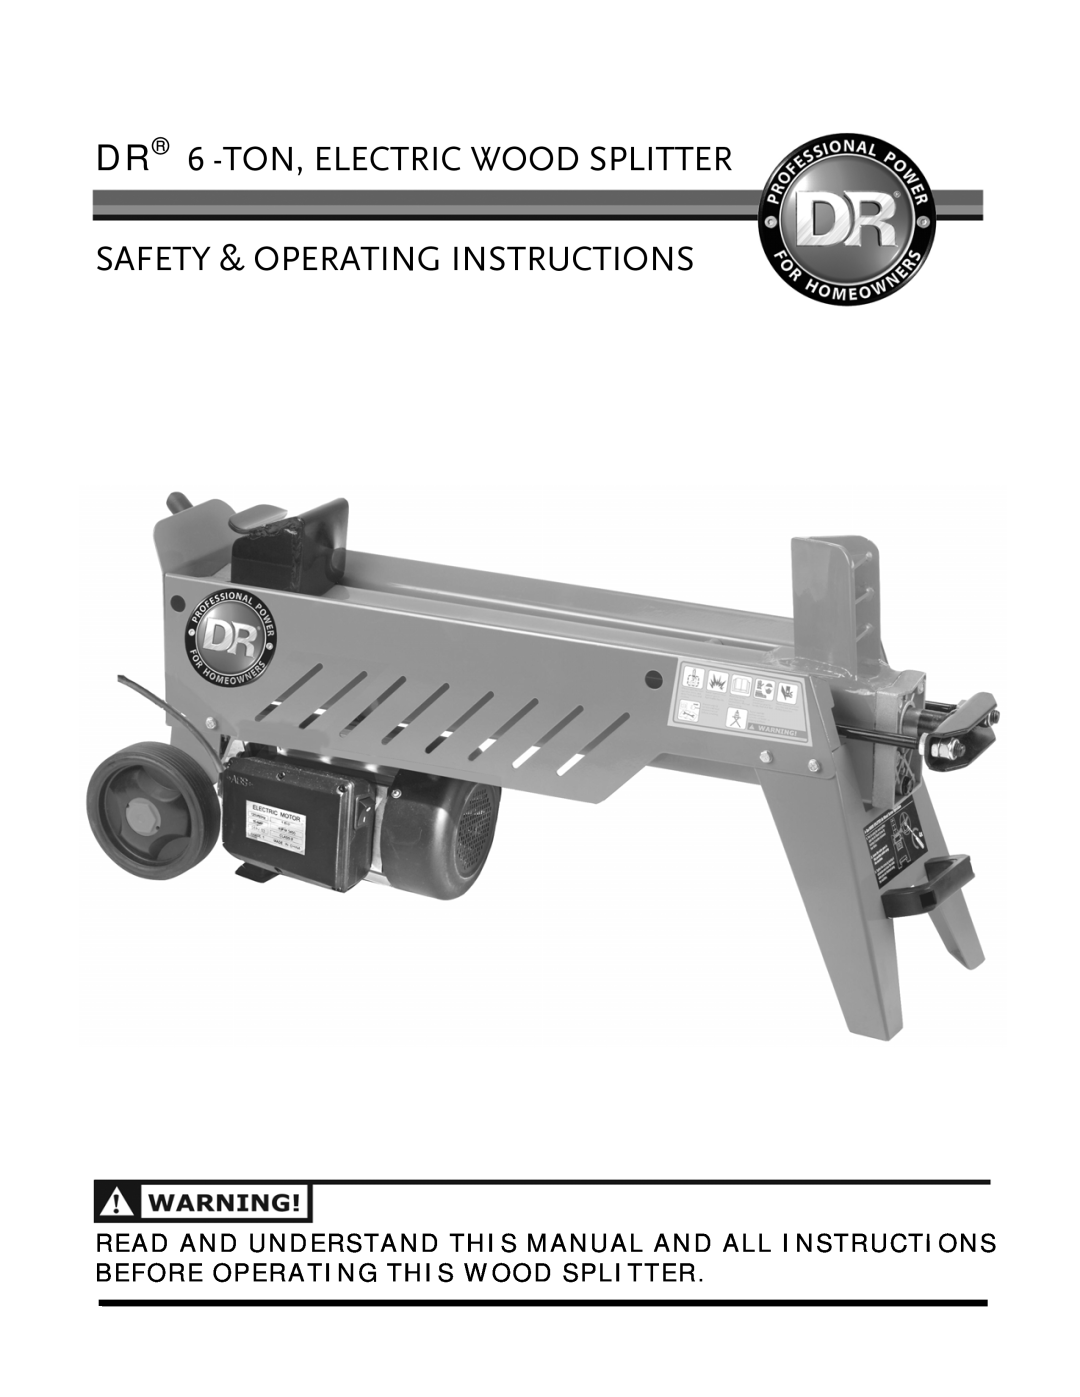 Country Home Products manual DR 6 -TON,ELECTRIC WOOD SPLITTER, Safety & Operating Instructions 